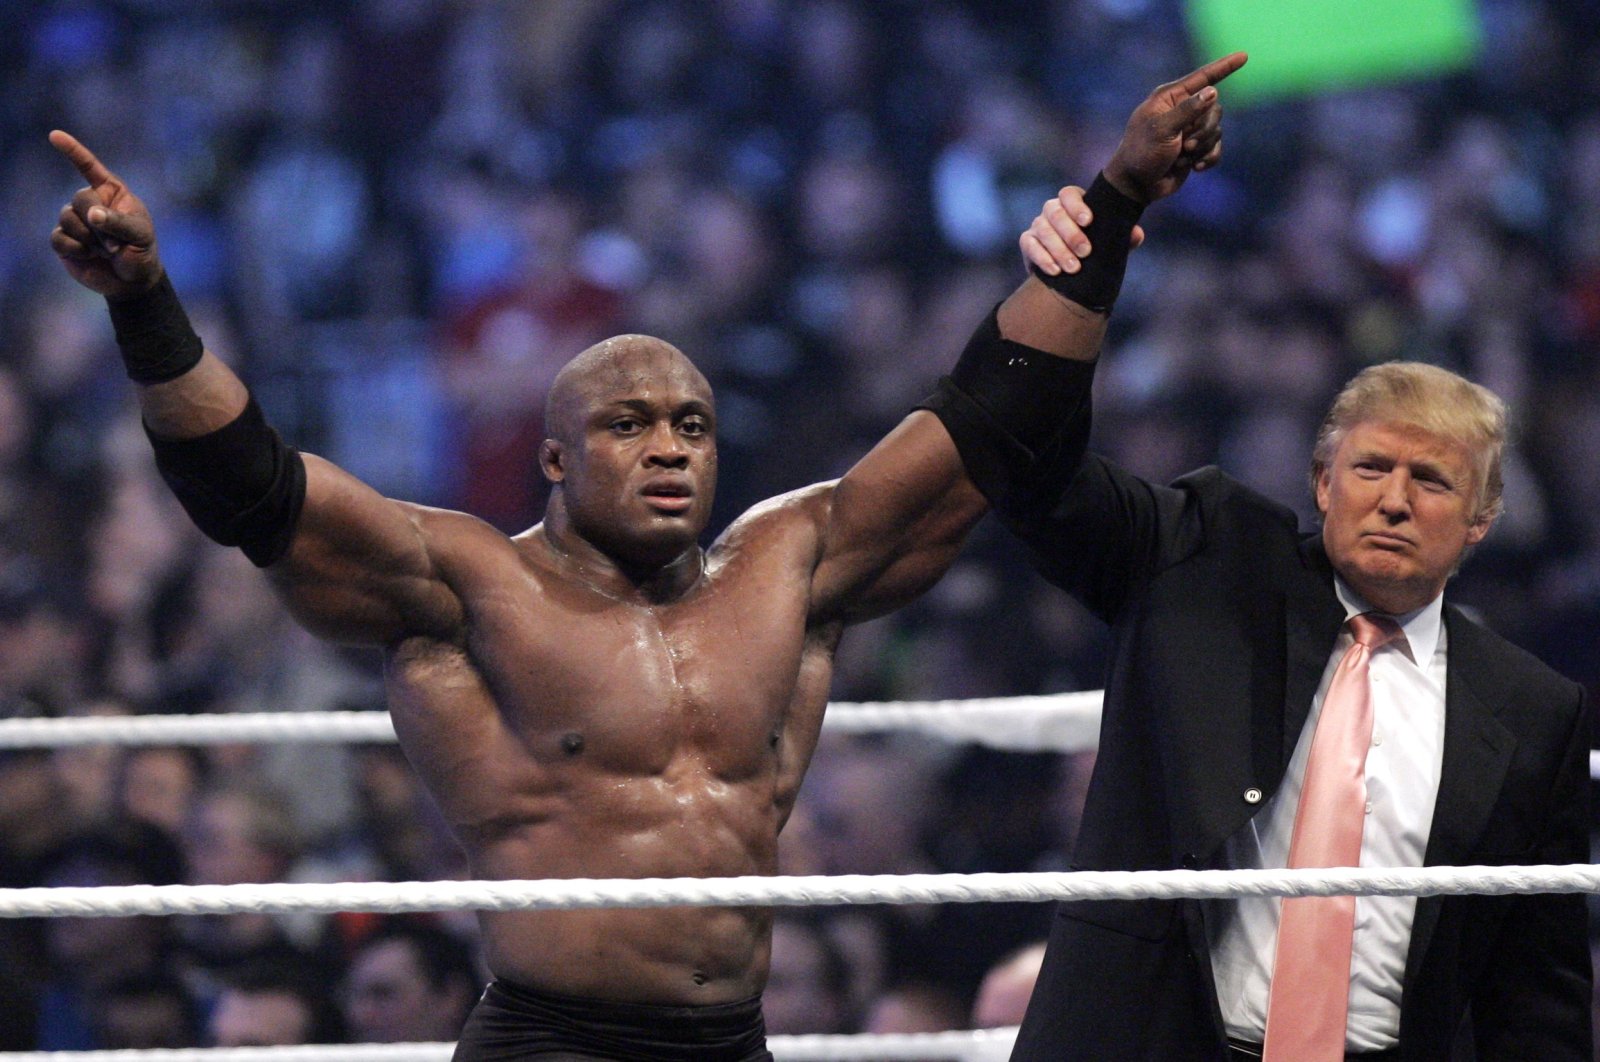 Donald Trump raises the arm of wrestler Bobby Lashley after he defeated Umaga at Wrestlemania 23 at Ford Field, Detroit, April 1, 2007. (AP Photo)